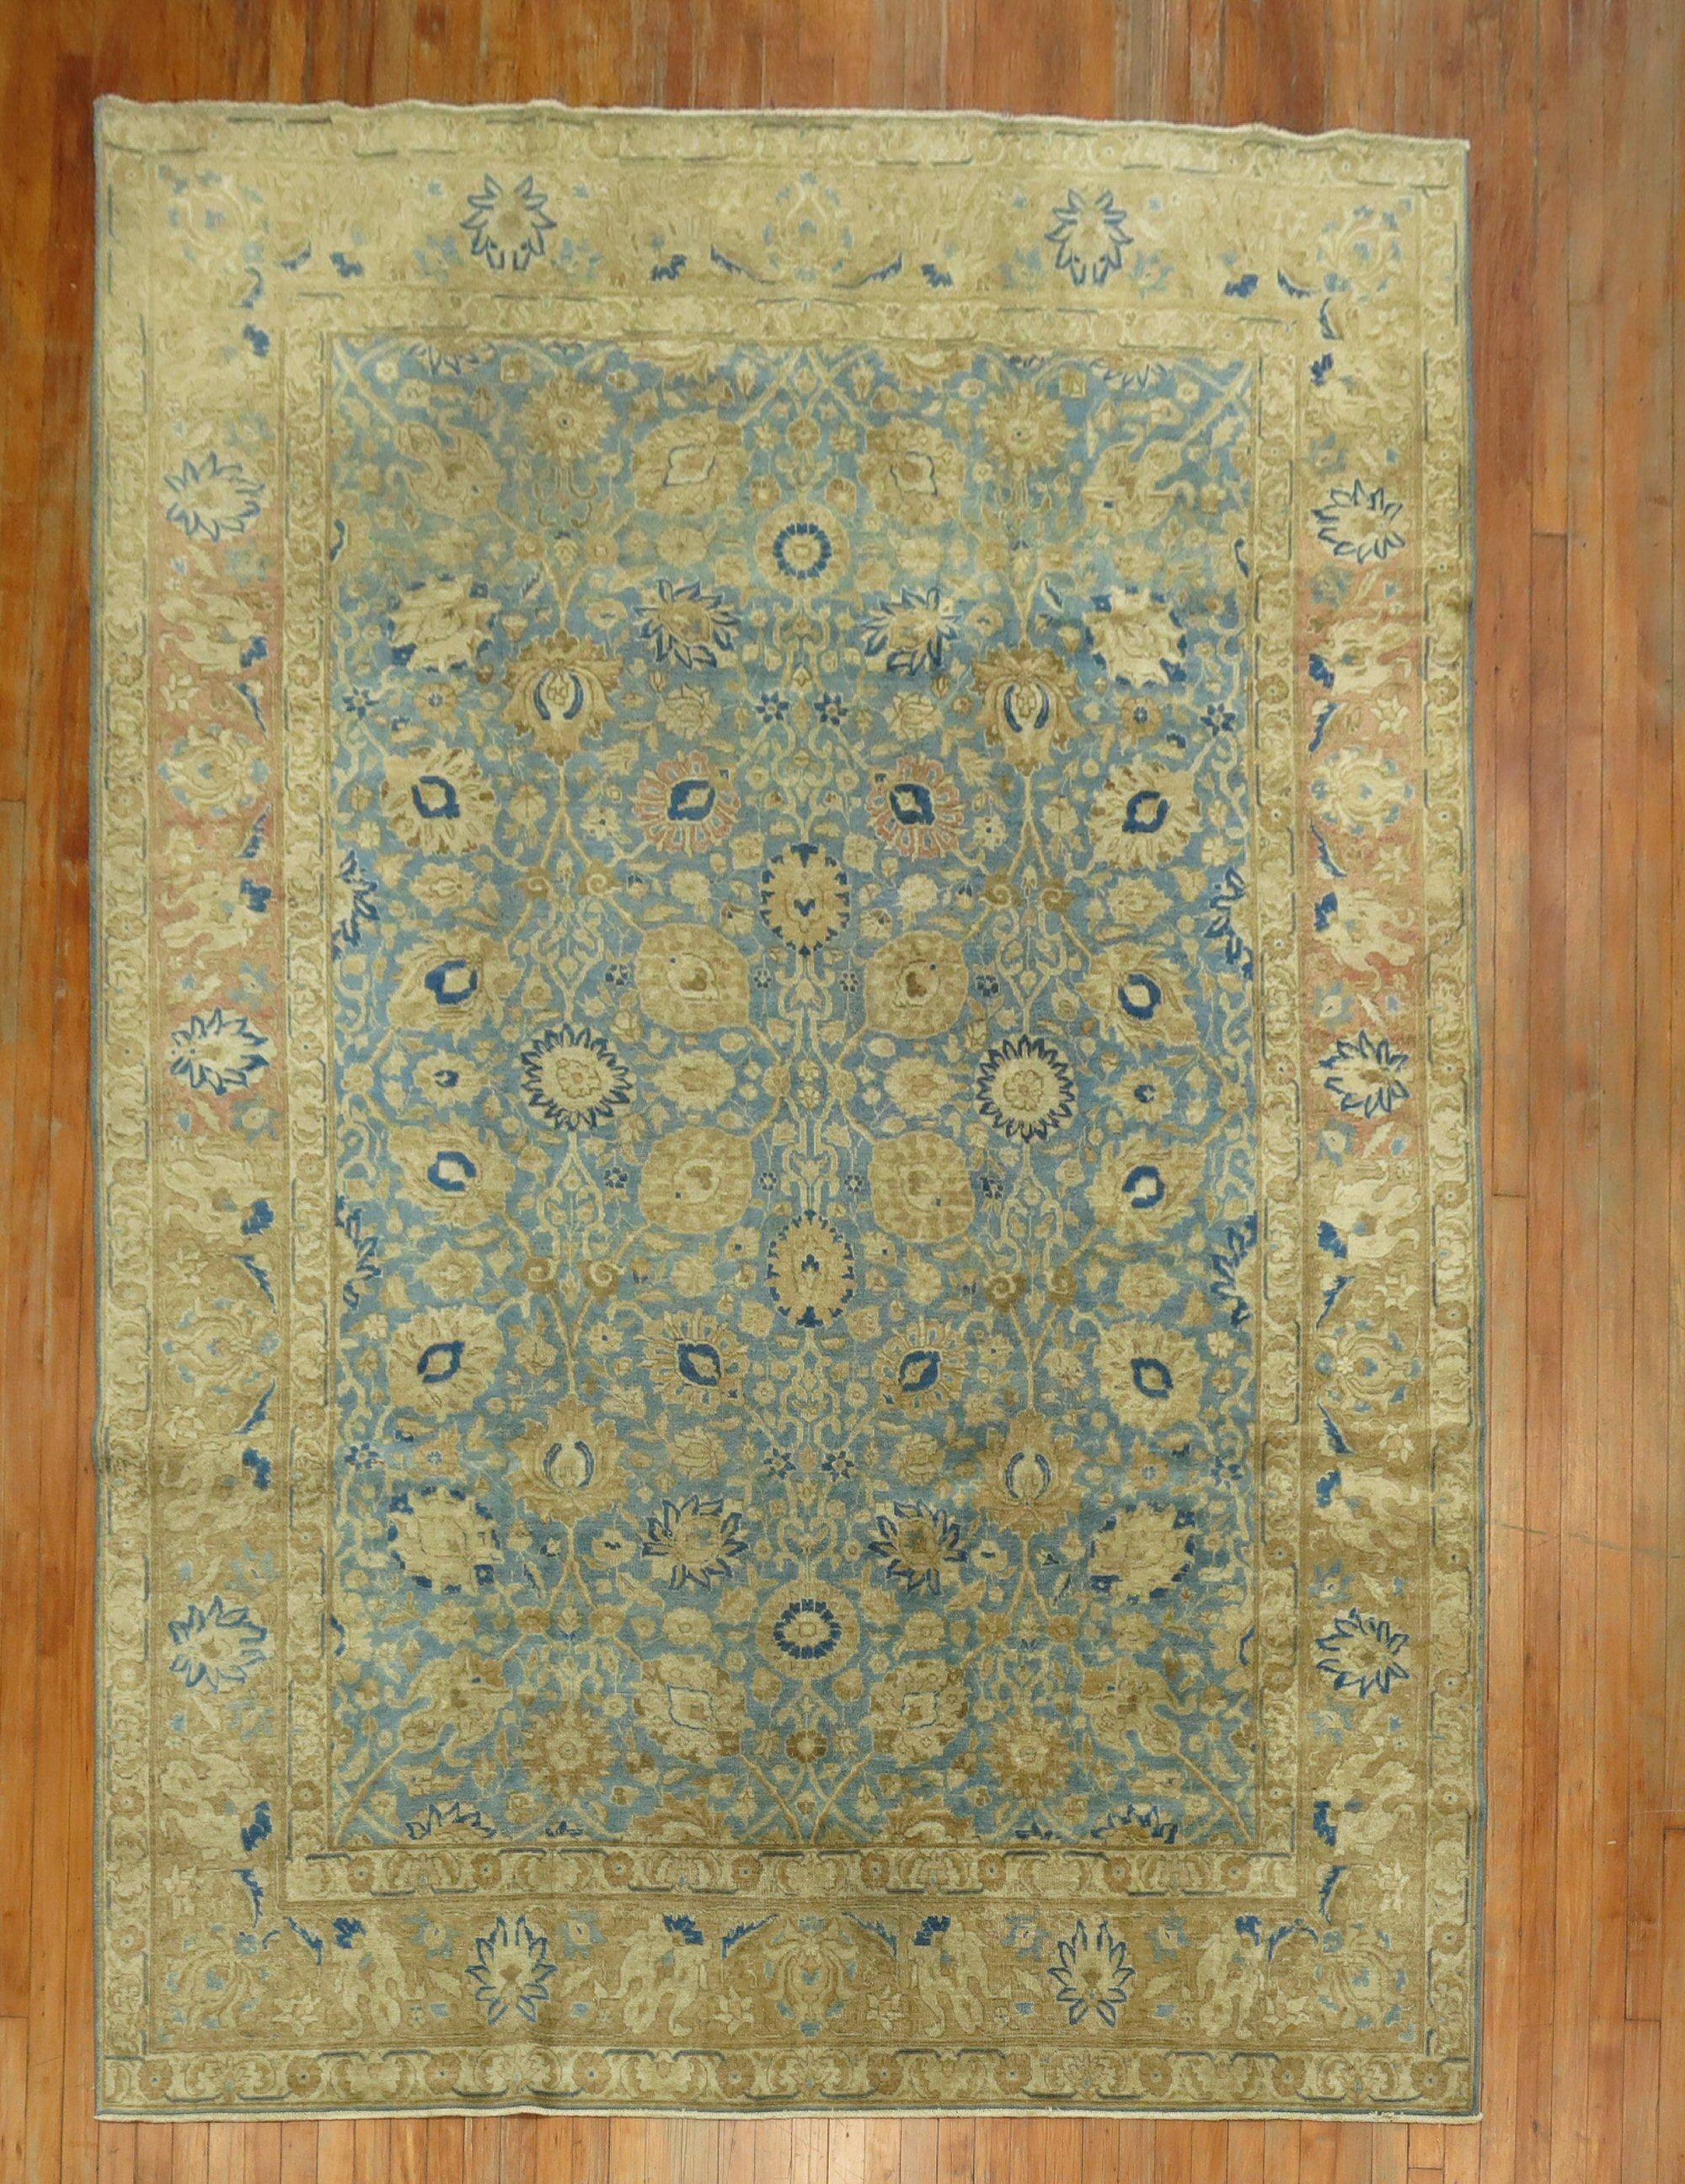 
Blue and Brown Tone Early 20th Century Persian Tabriz Rug in overall Good Condition.

Details
rug no.	j1266
size	7' 3